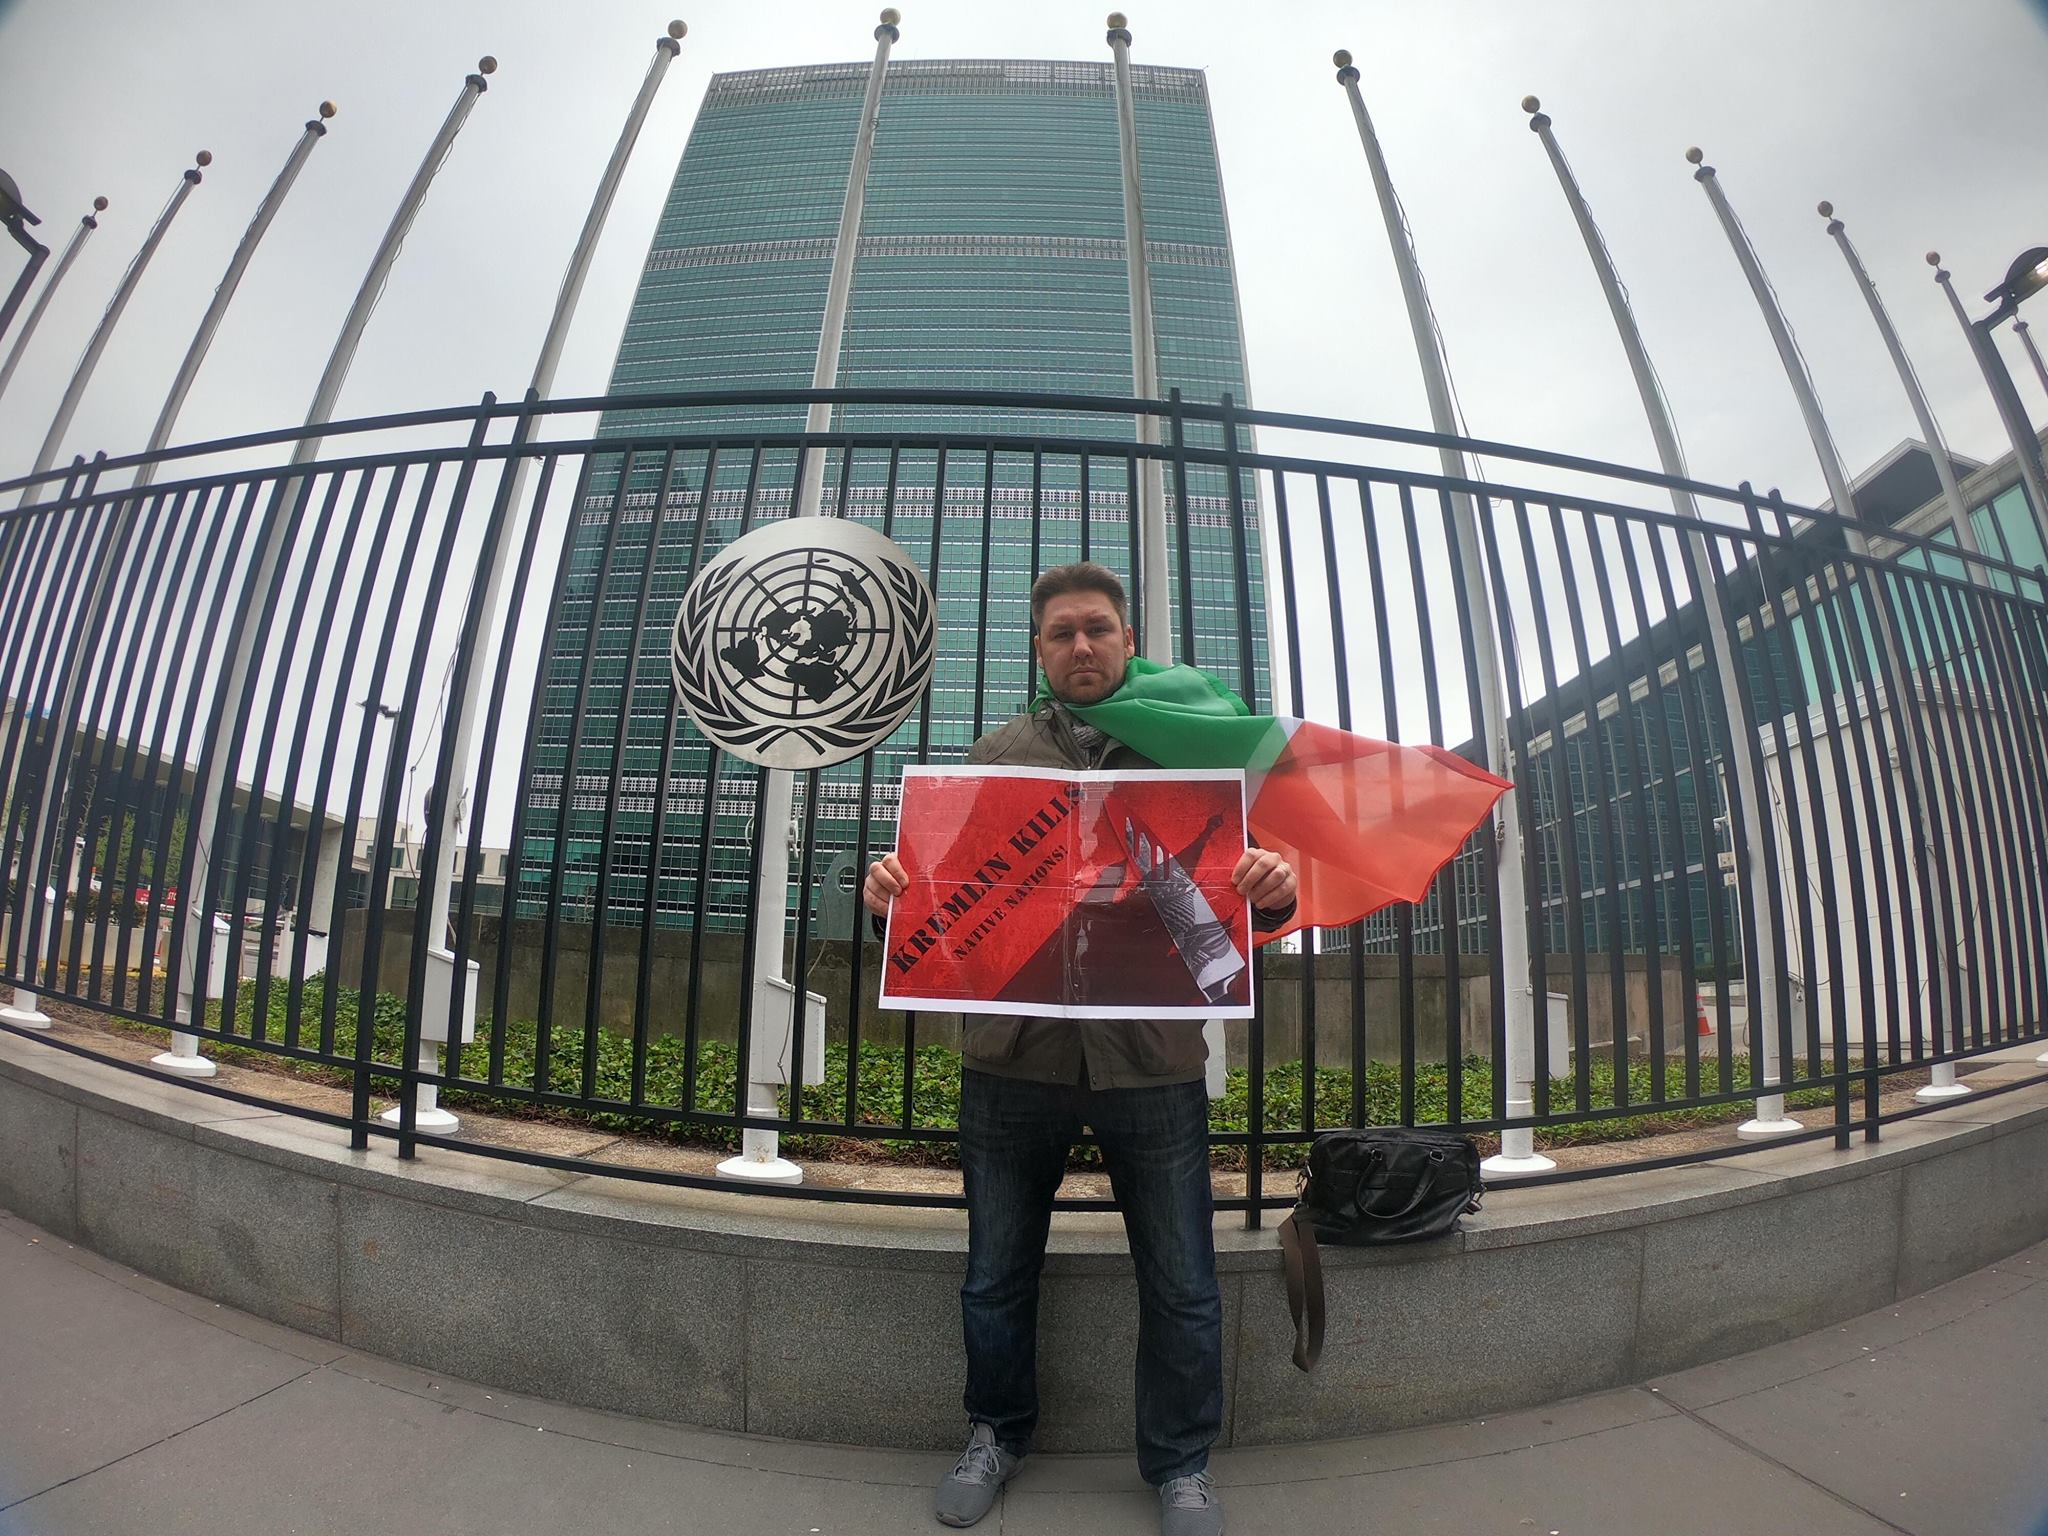 Free Idel-Ural picketed UN headquarters